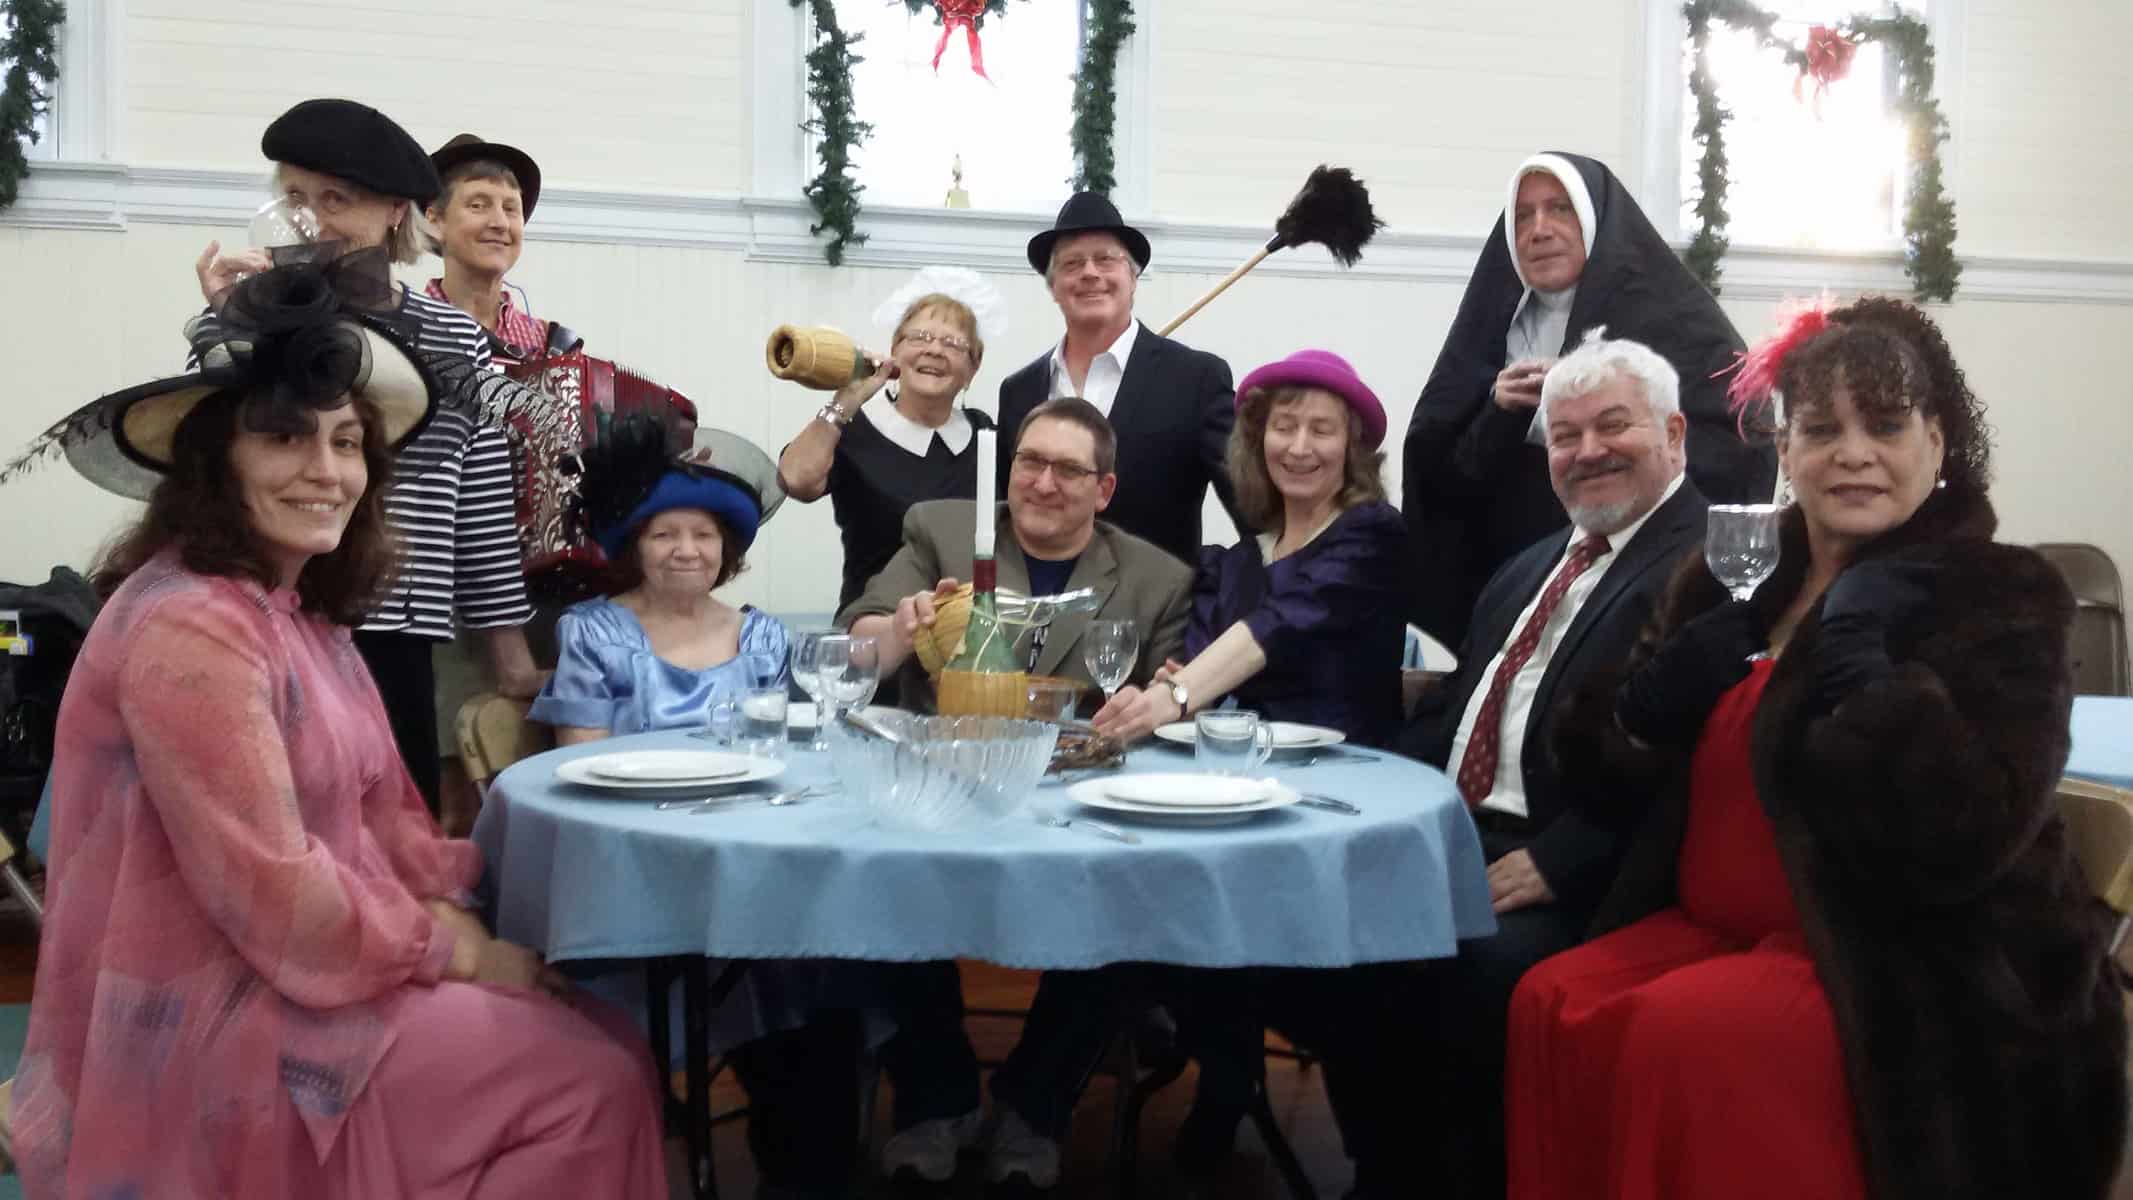 Members of the cast of Walpole Players mystery dinner “Murder on the Vine” set in an Italian winery in the ‘50s